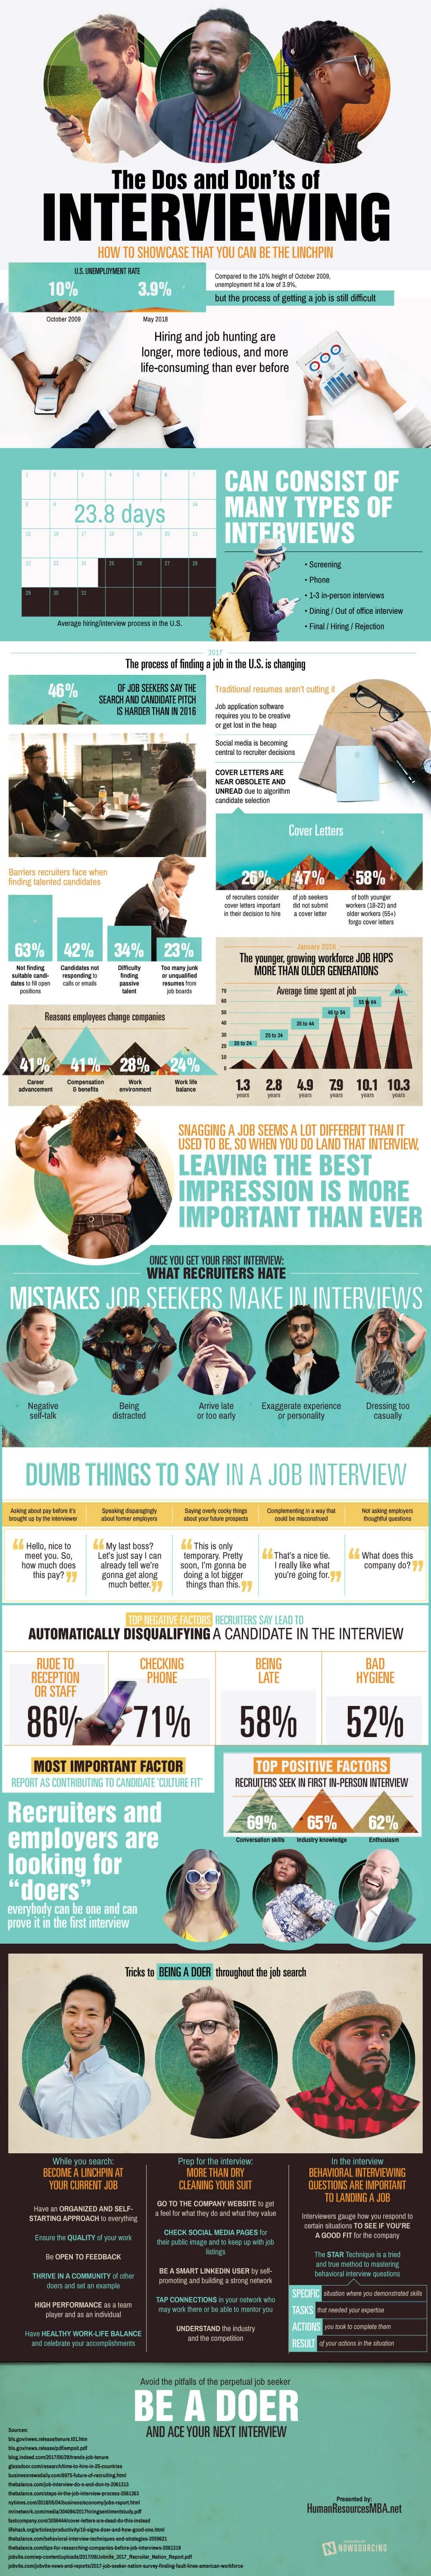 The Dos and Don’ts of Interviewing - #infographic